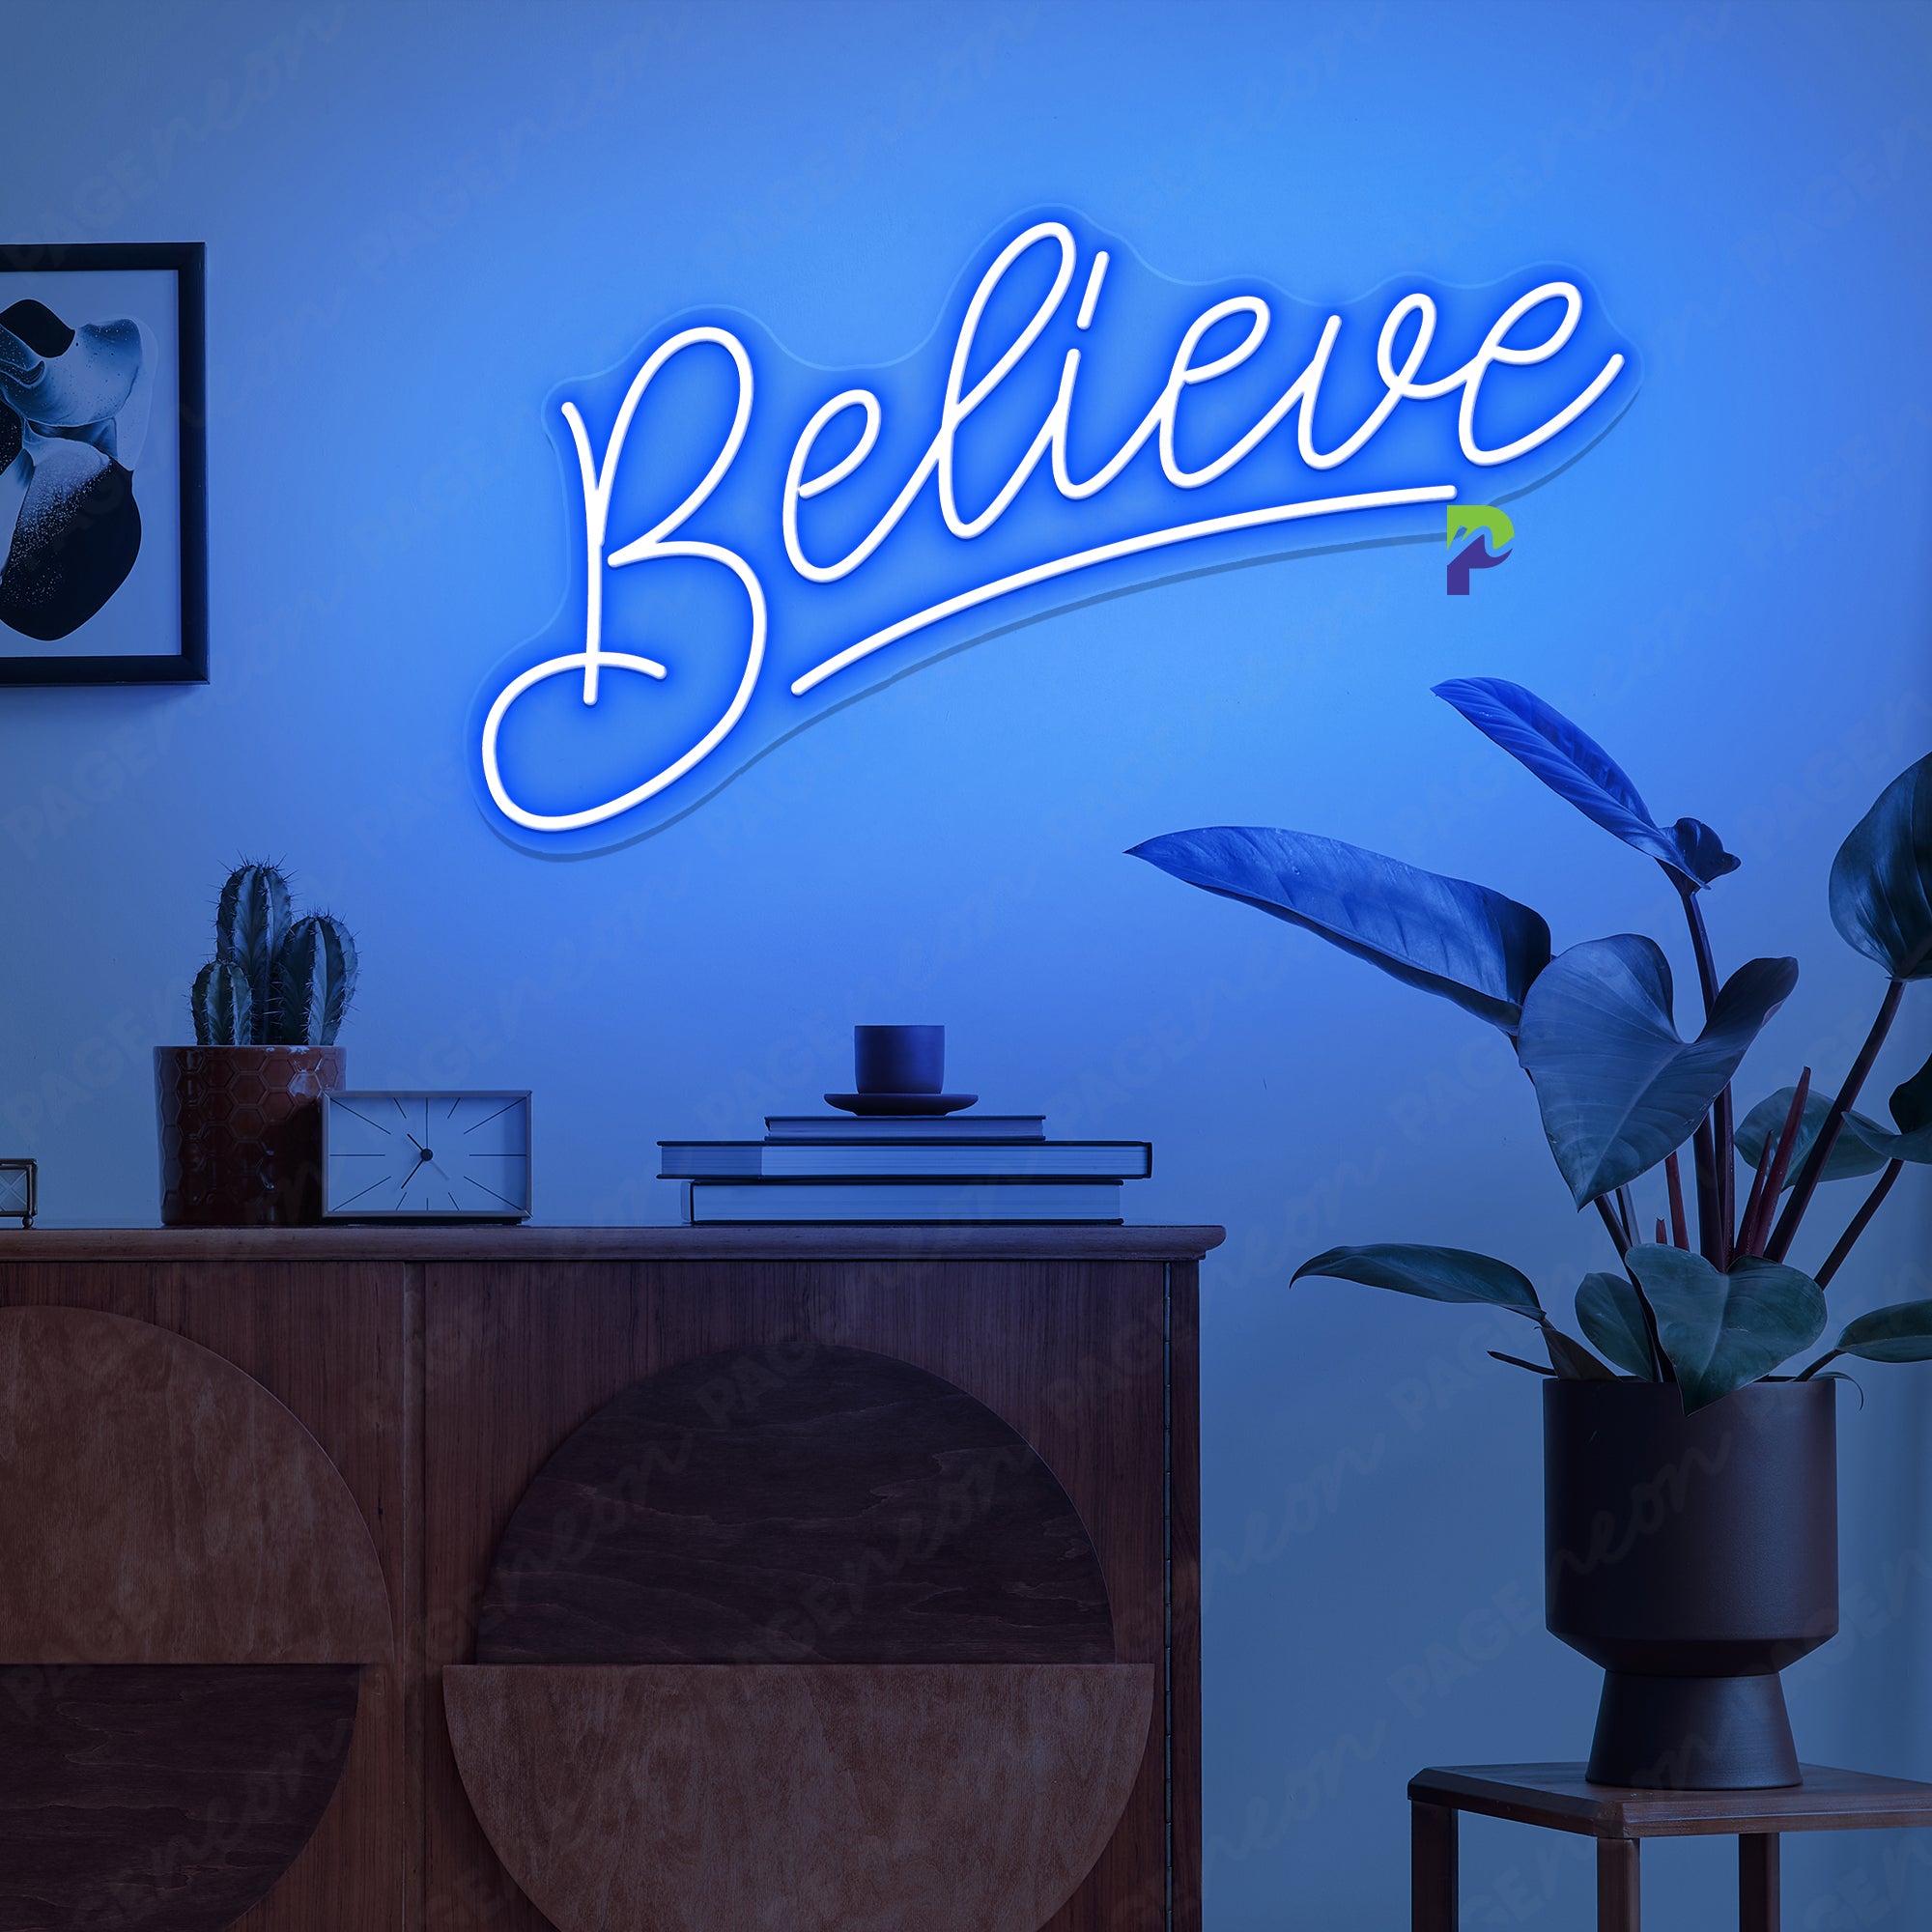 Believe Neon Sign Simple Inspirational Word Led Light